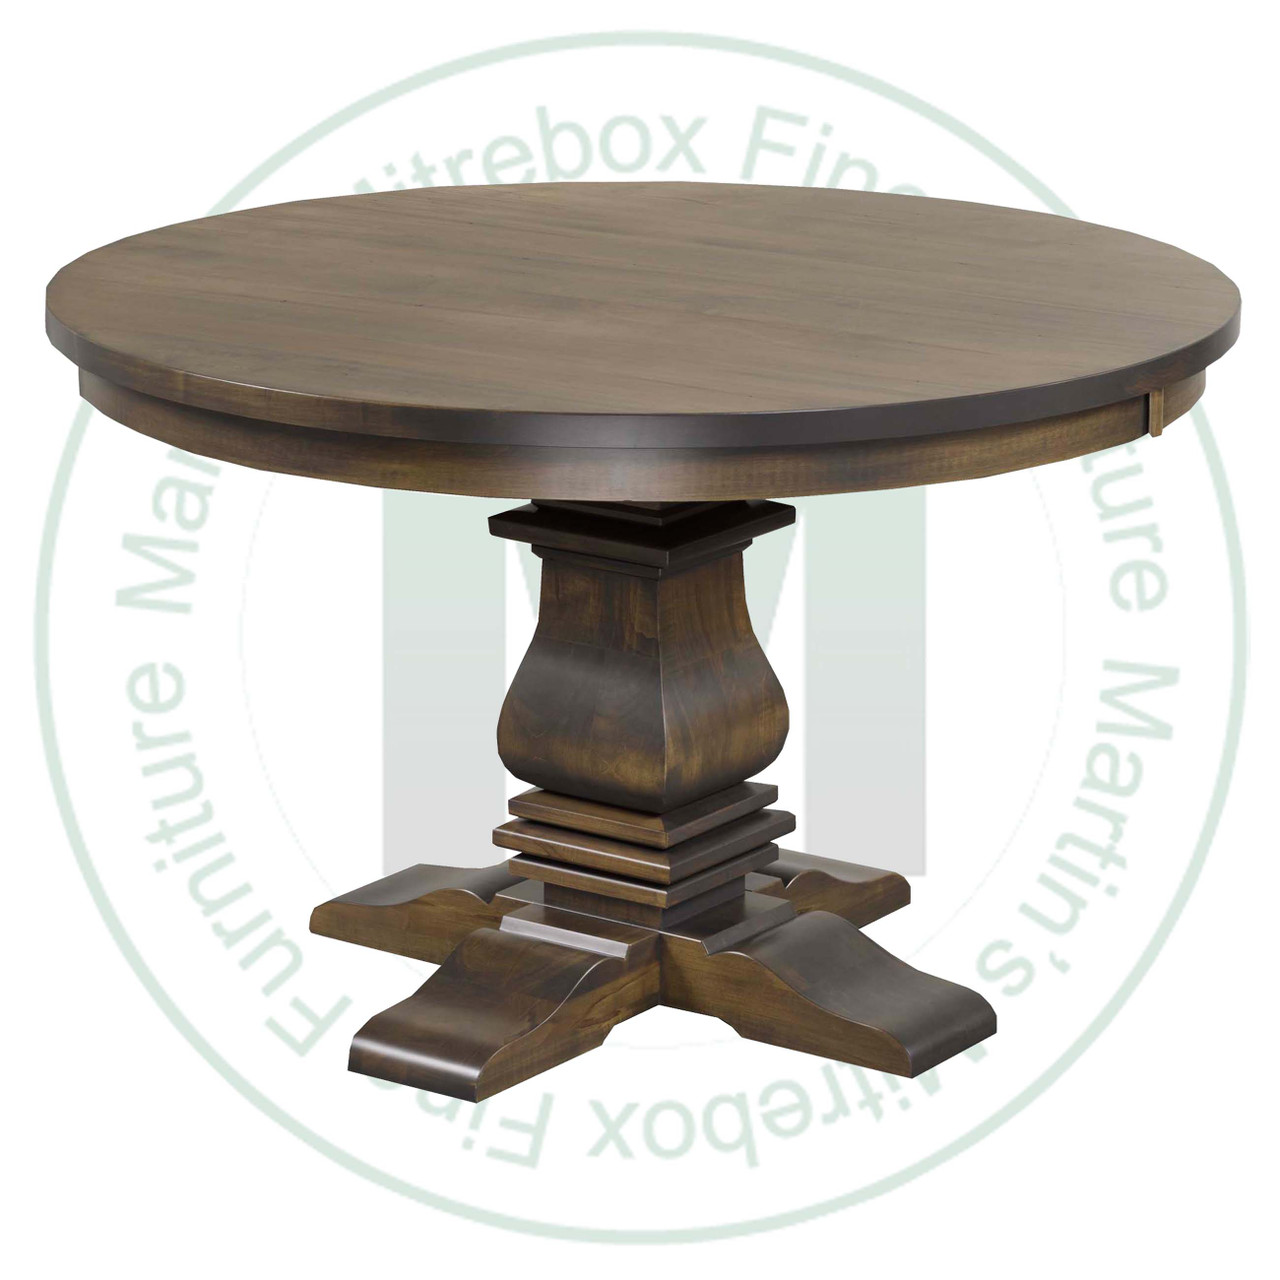 Wormy Maple Spartan Collection Single Pedestal Table 36''D x 54''W x 30''H. Table Has 1'' Thick Top